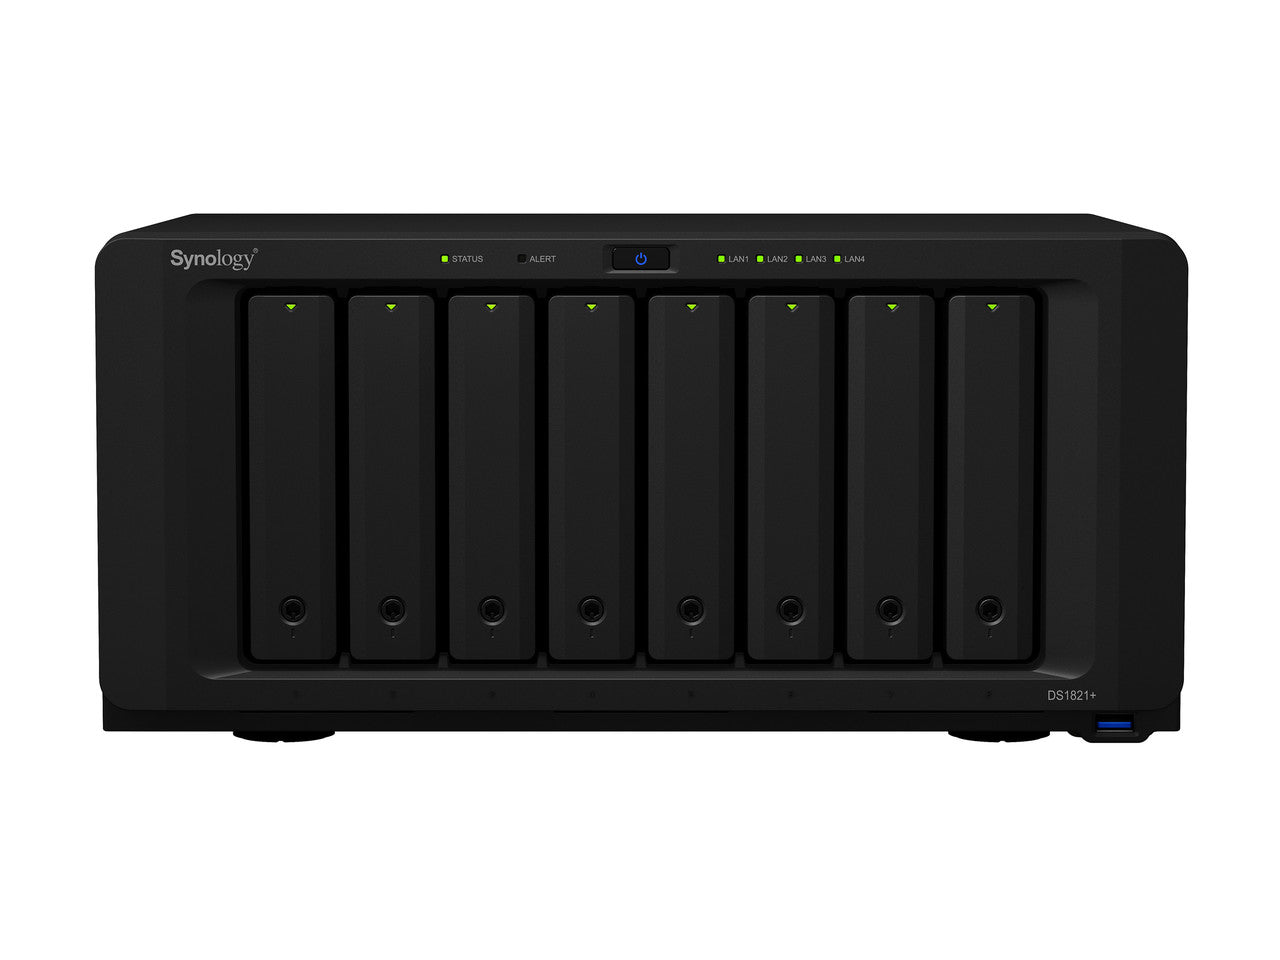 Synology DS1821+ 8-BAY DiskStation with 32GB Synology RAM and 16TB (8x2TB) Seagate Ironwolf NAS Drives Fully Assembled and Tested